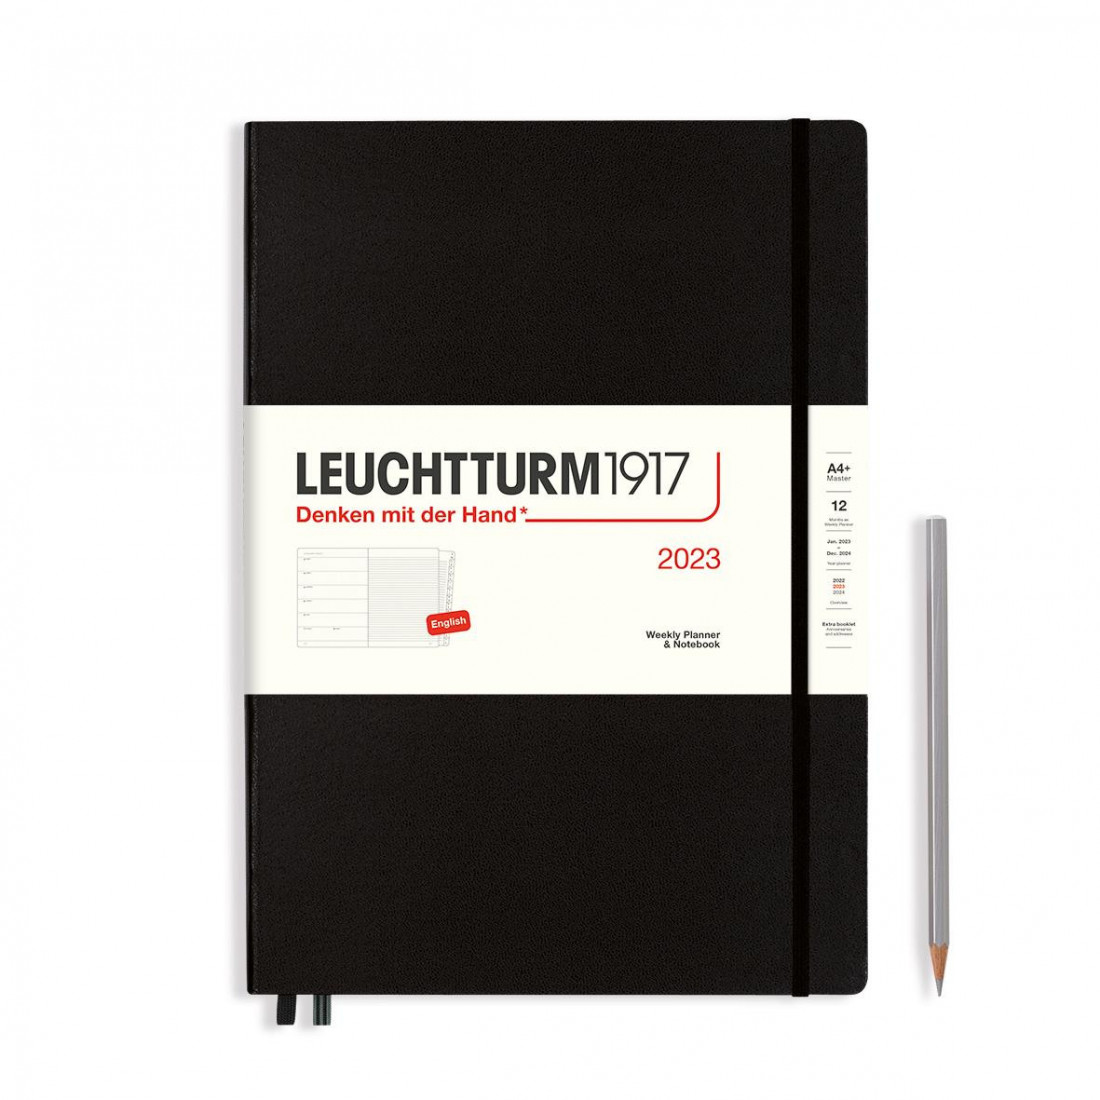 Leuchtturm 1917 Weekly Planner & Notebook A4 plus,  2023, with booklet, Black, English